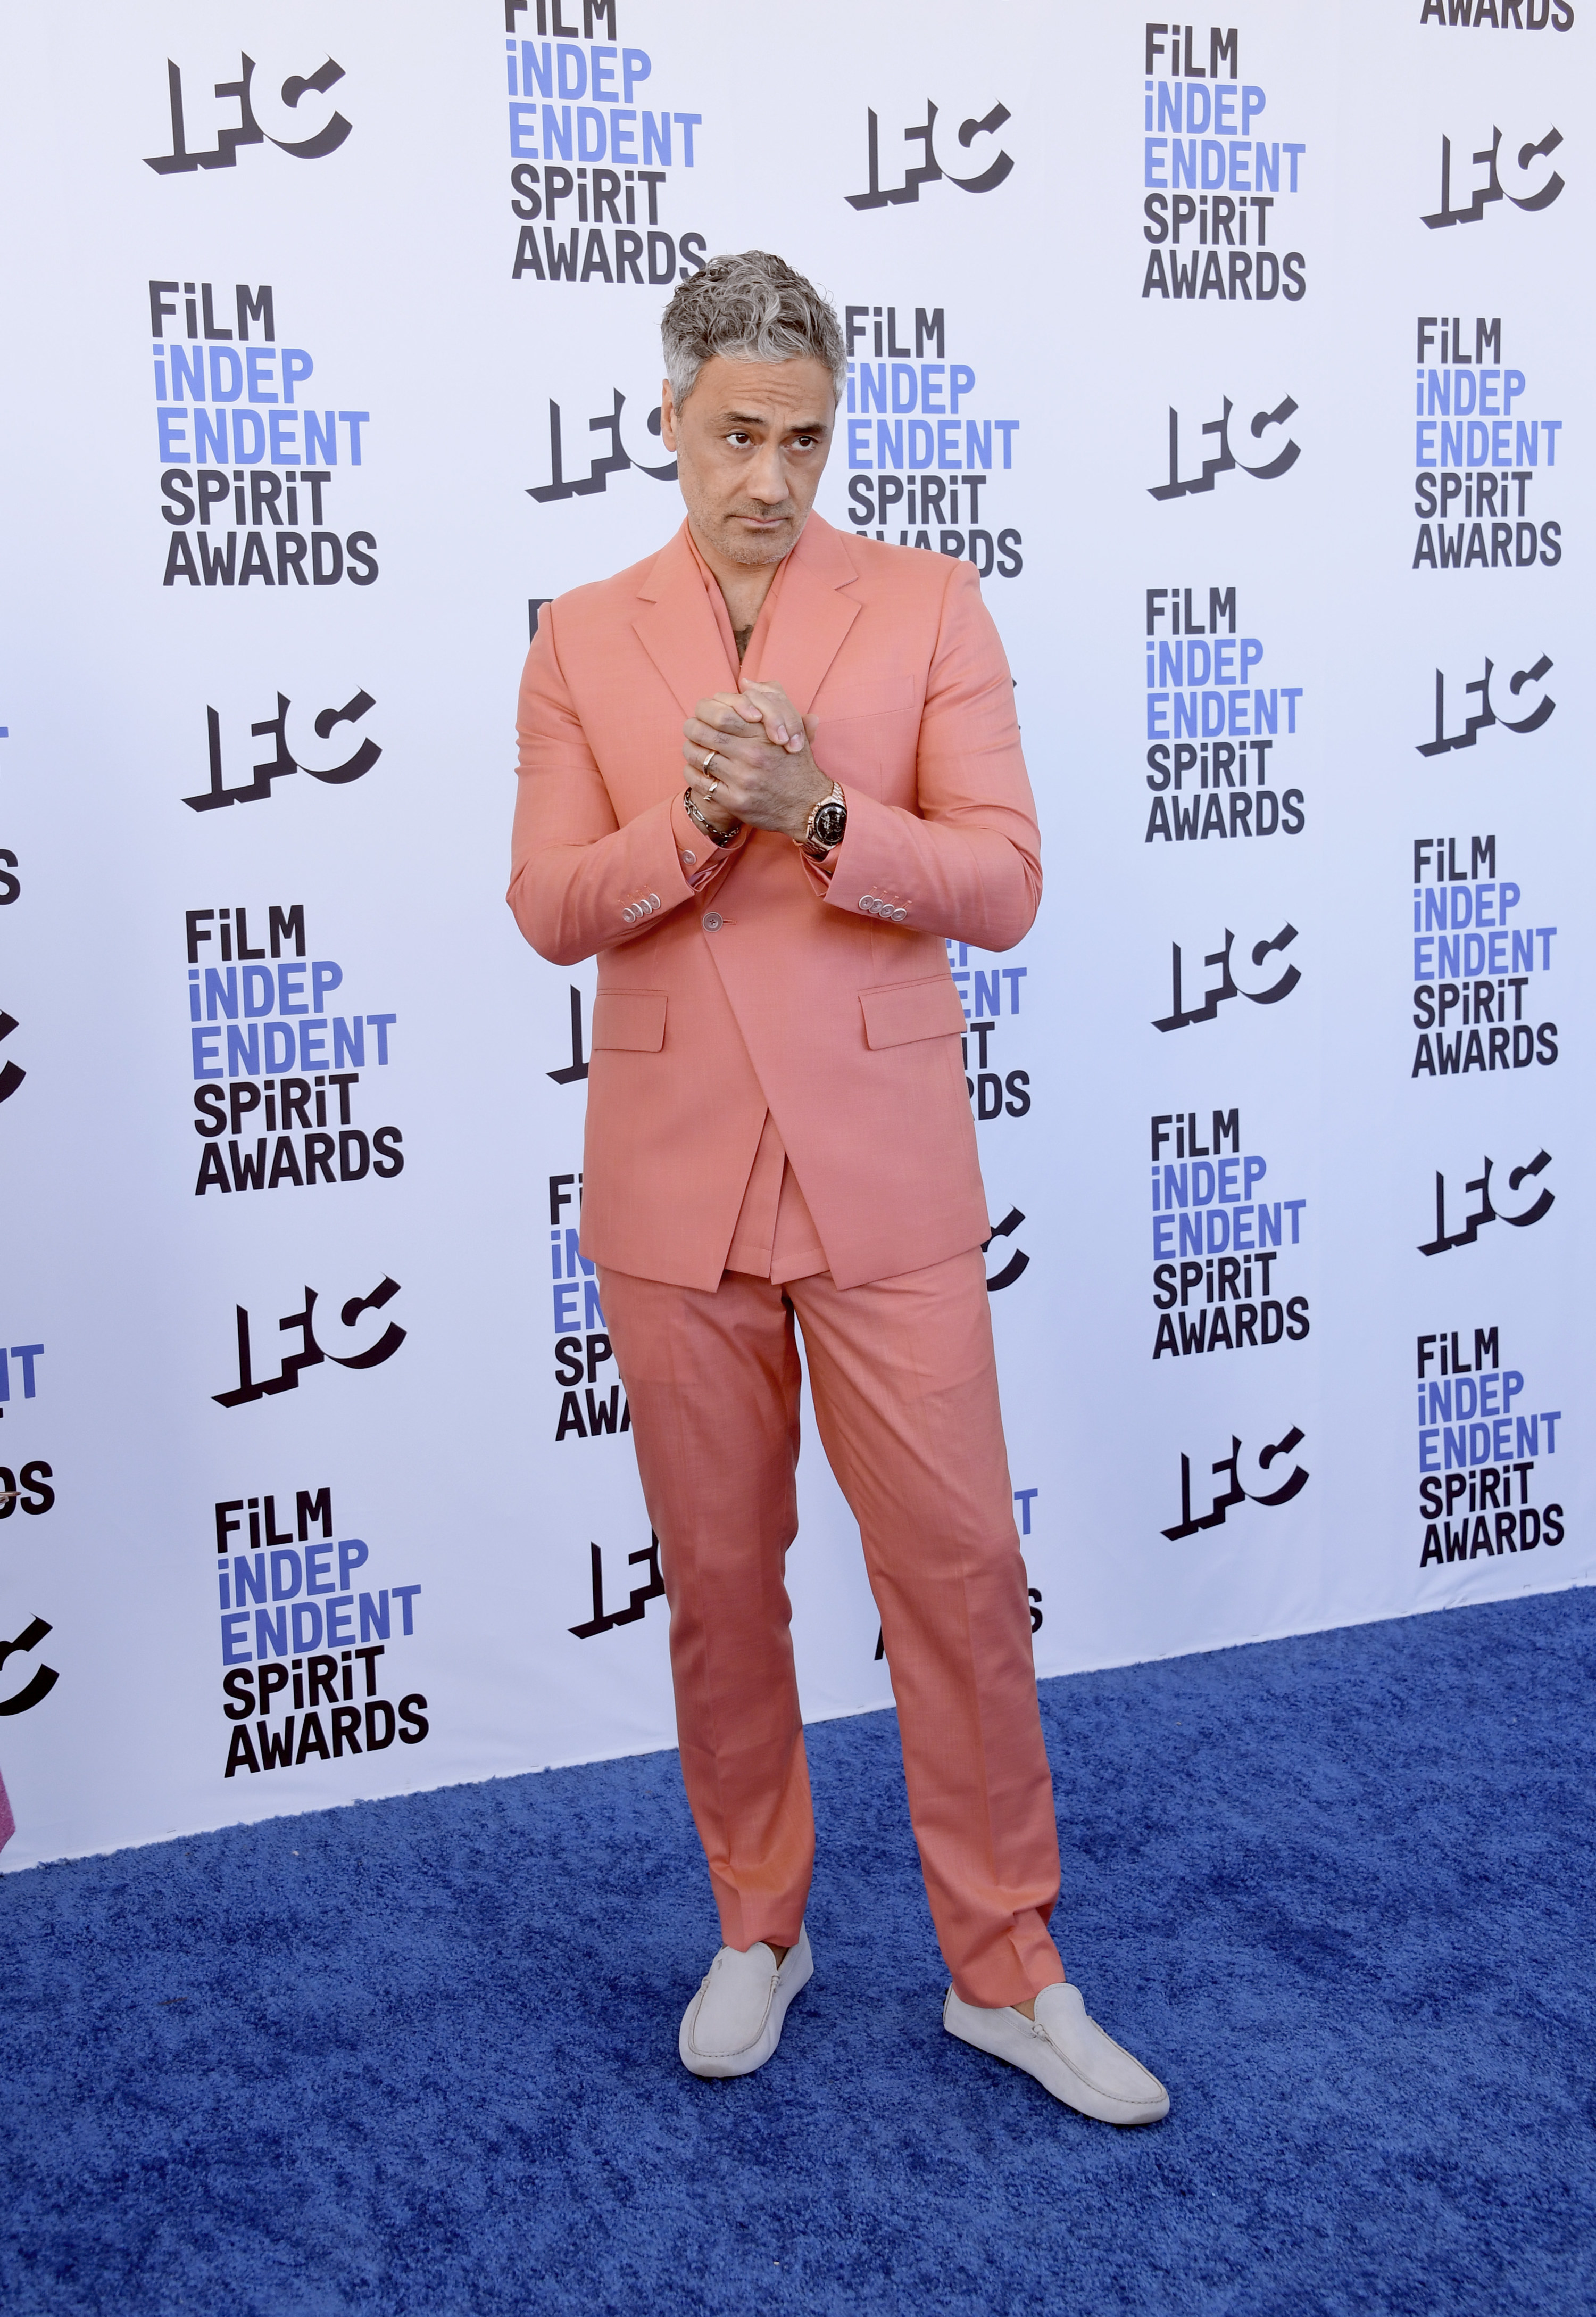 Taika wears a salmon colored suit